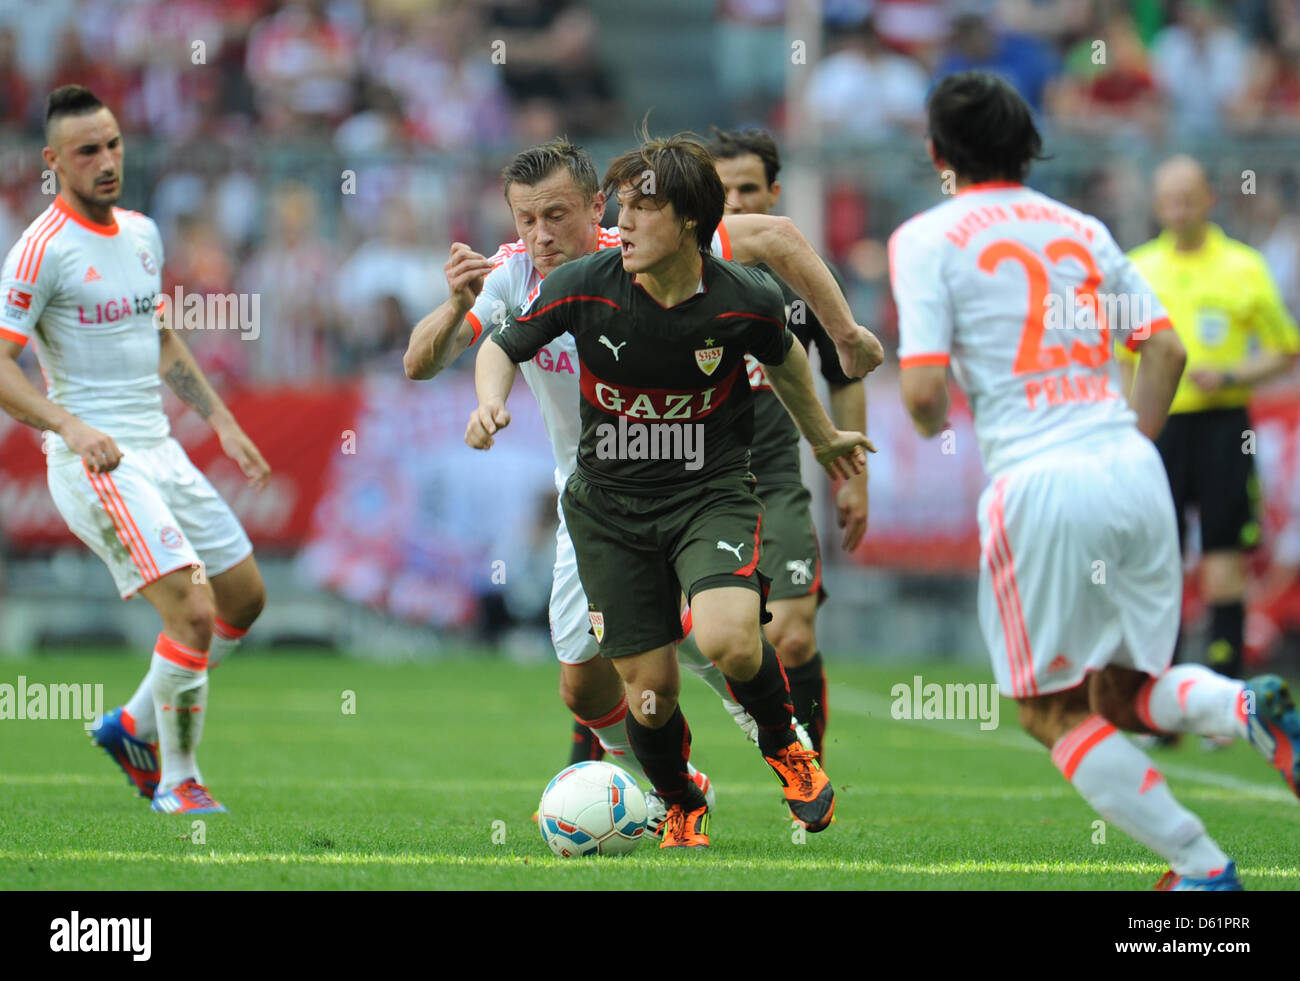 Bayern Munich's Ivica Olic (back, C, L) vies for the ball with Stuttgart's Gotoku Sakai (C, front) during the Bundesliga soccer match between FC Bayern Munich and  VfB Stuttgart at the Allianz Arena in Munich, Germany, 28 April 2012. Photo: Andreas Gebert Stock Photo